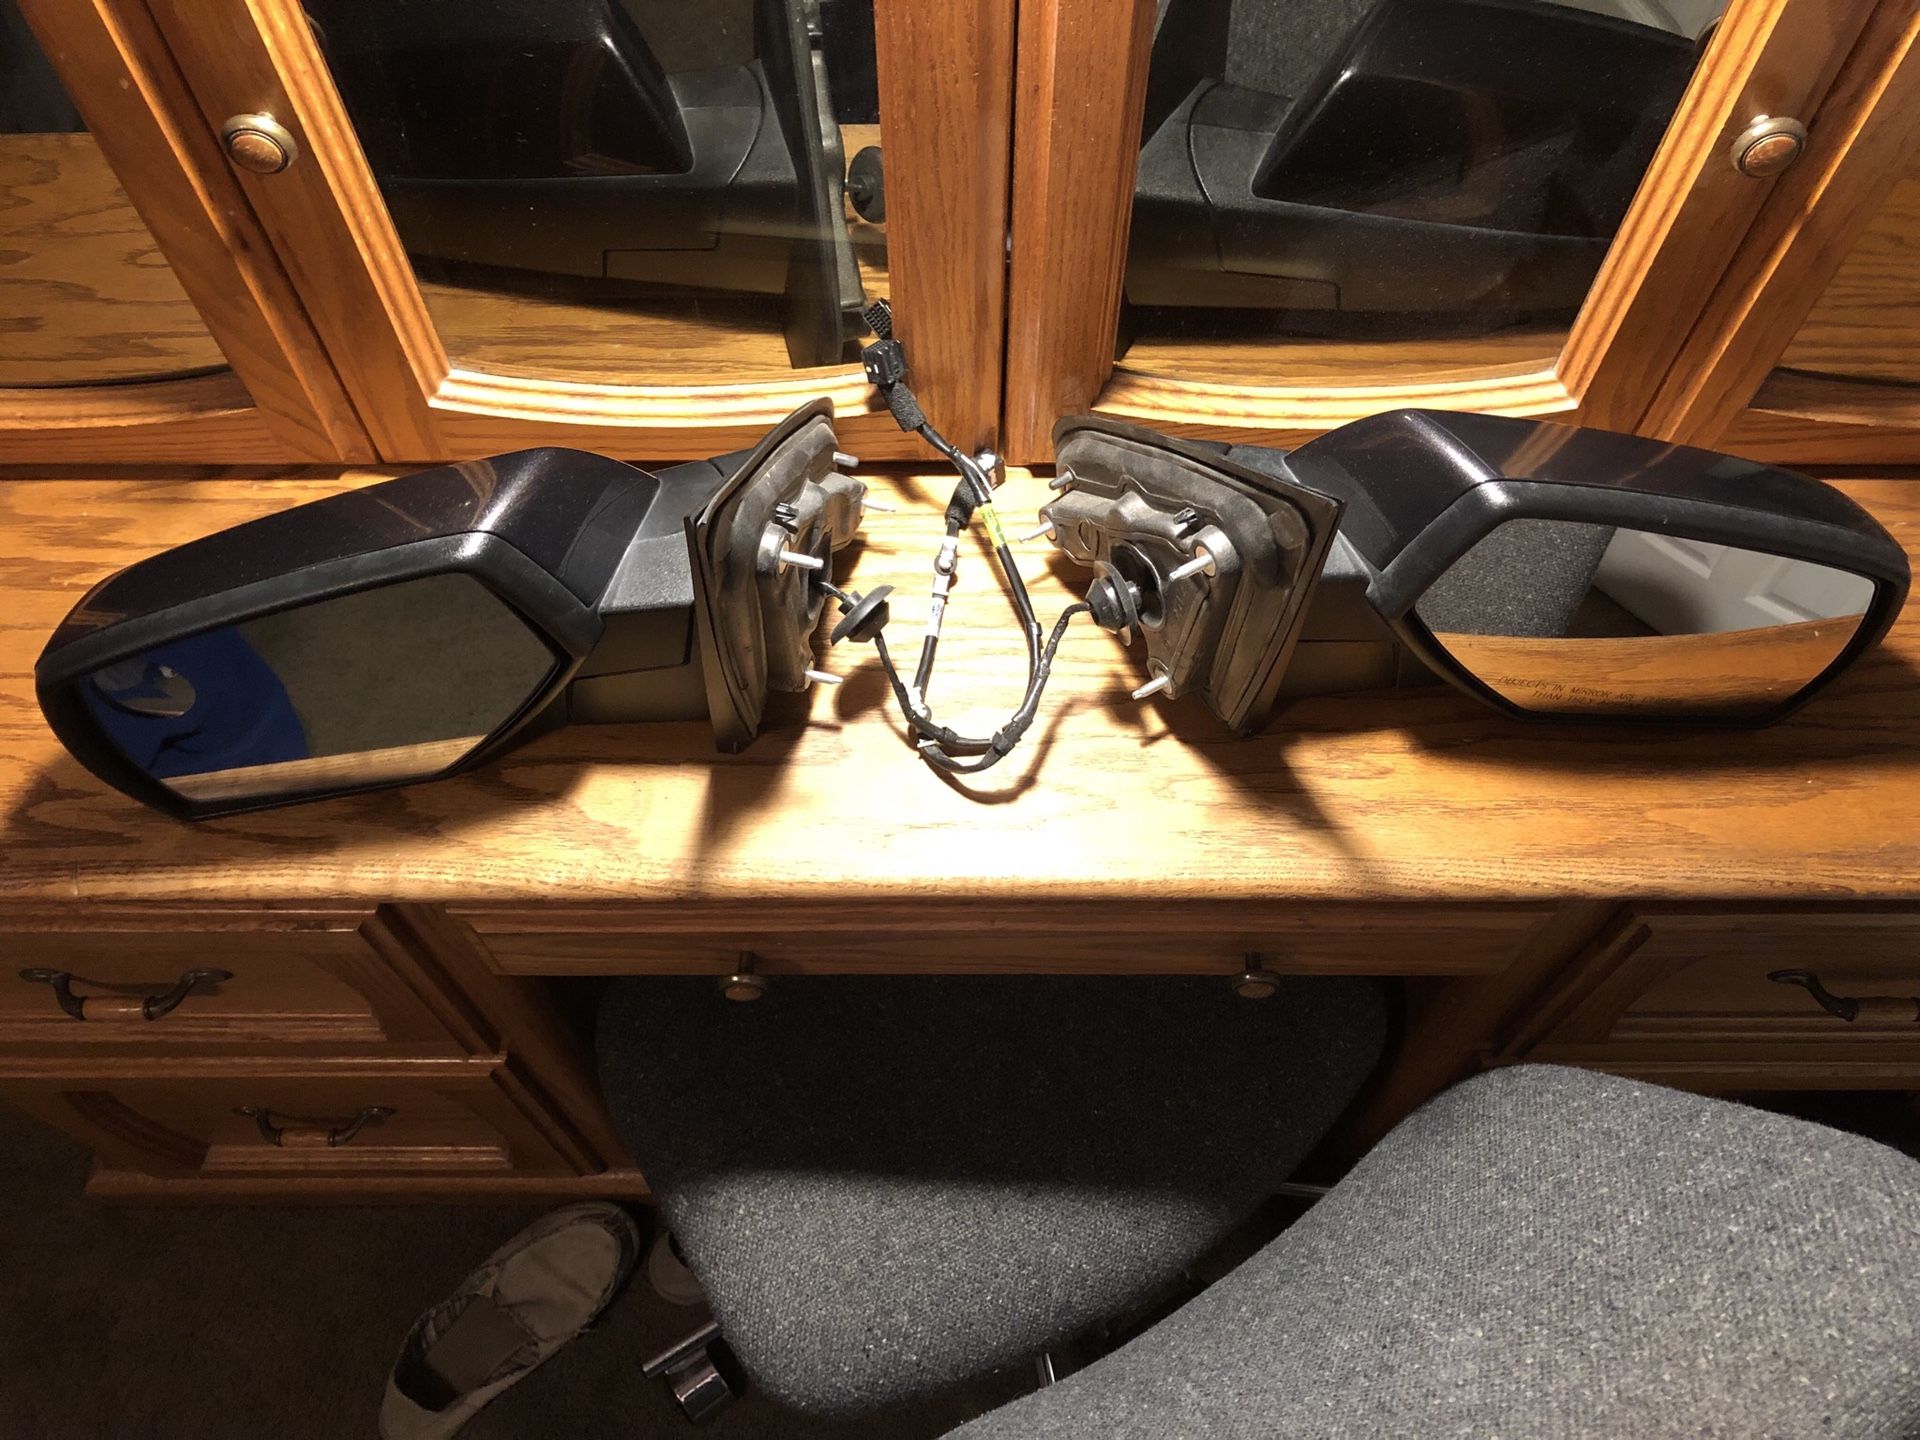 2016 GMC Sierra OEM mirrors left and right side